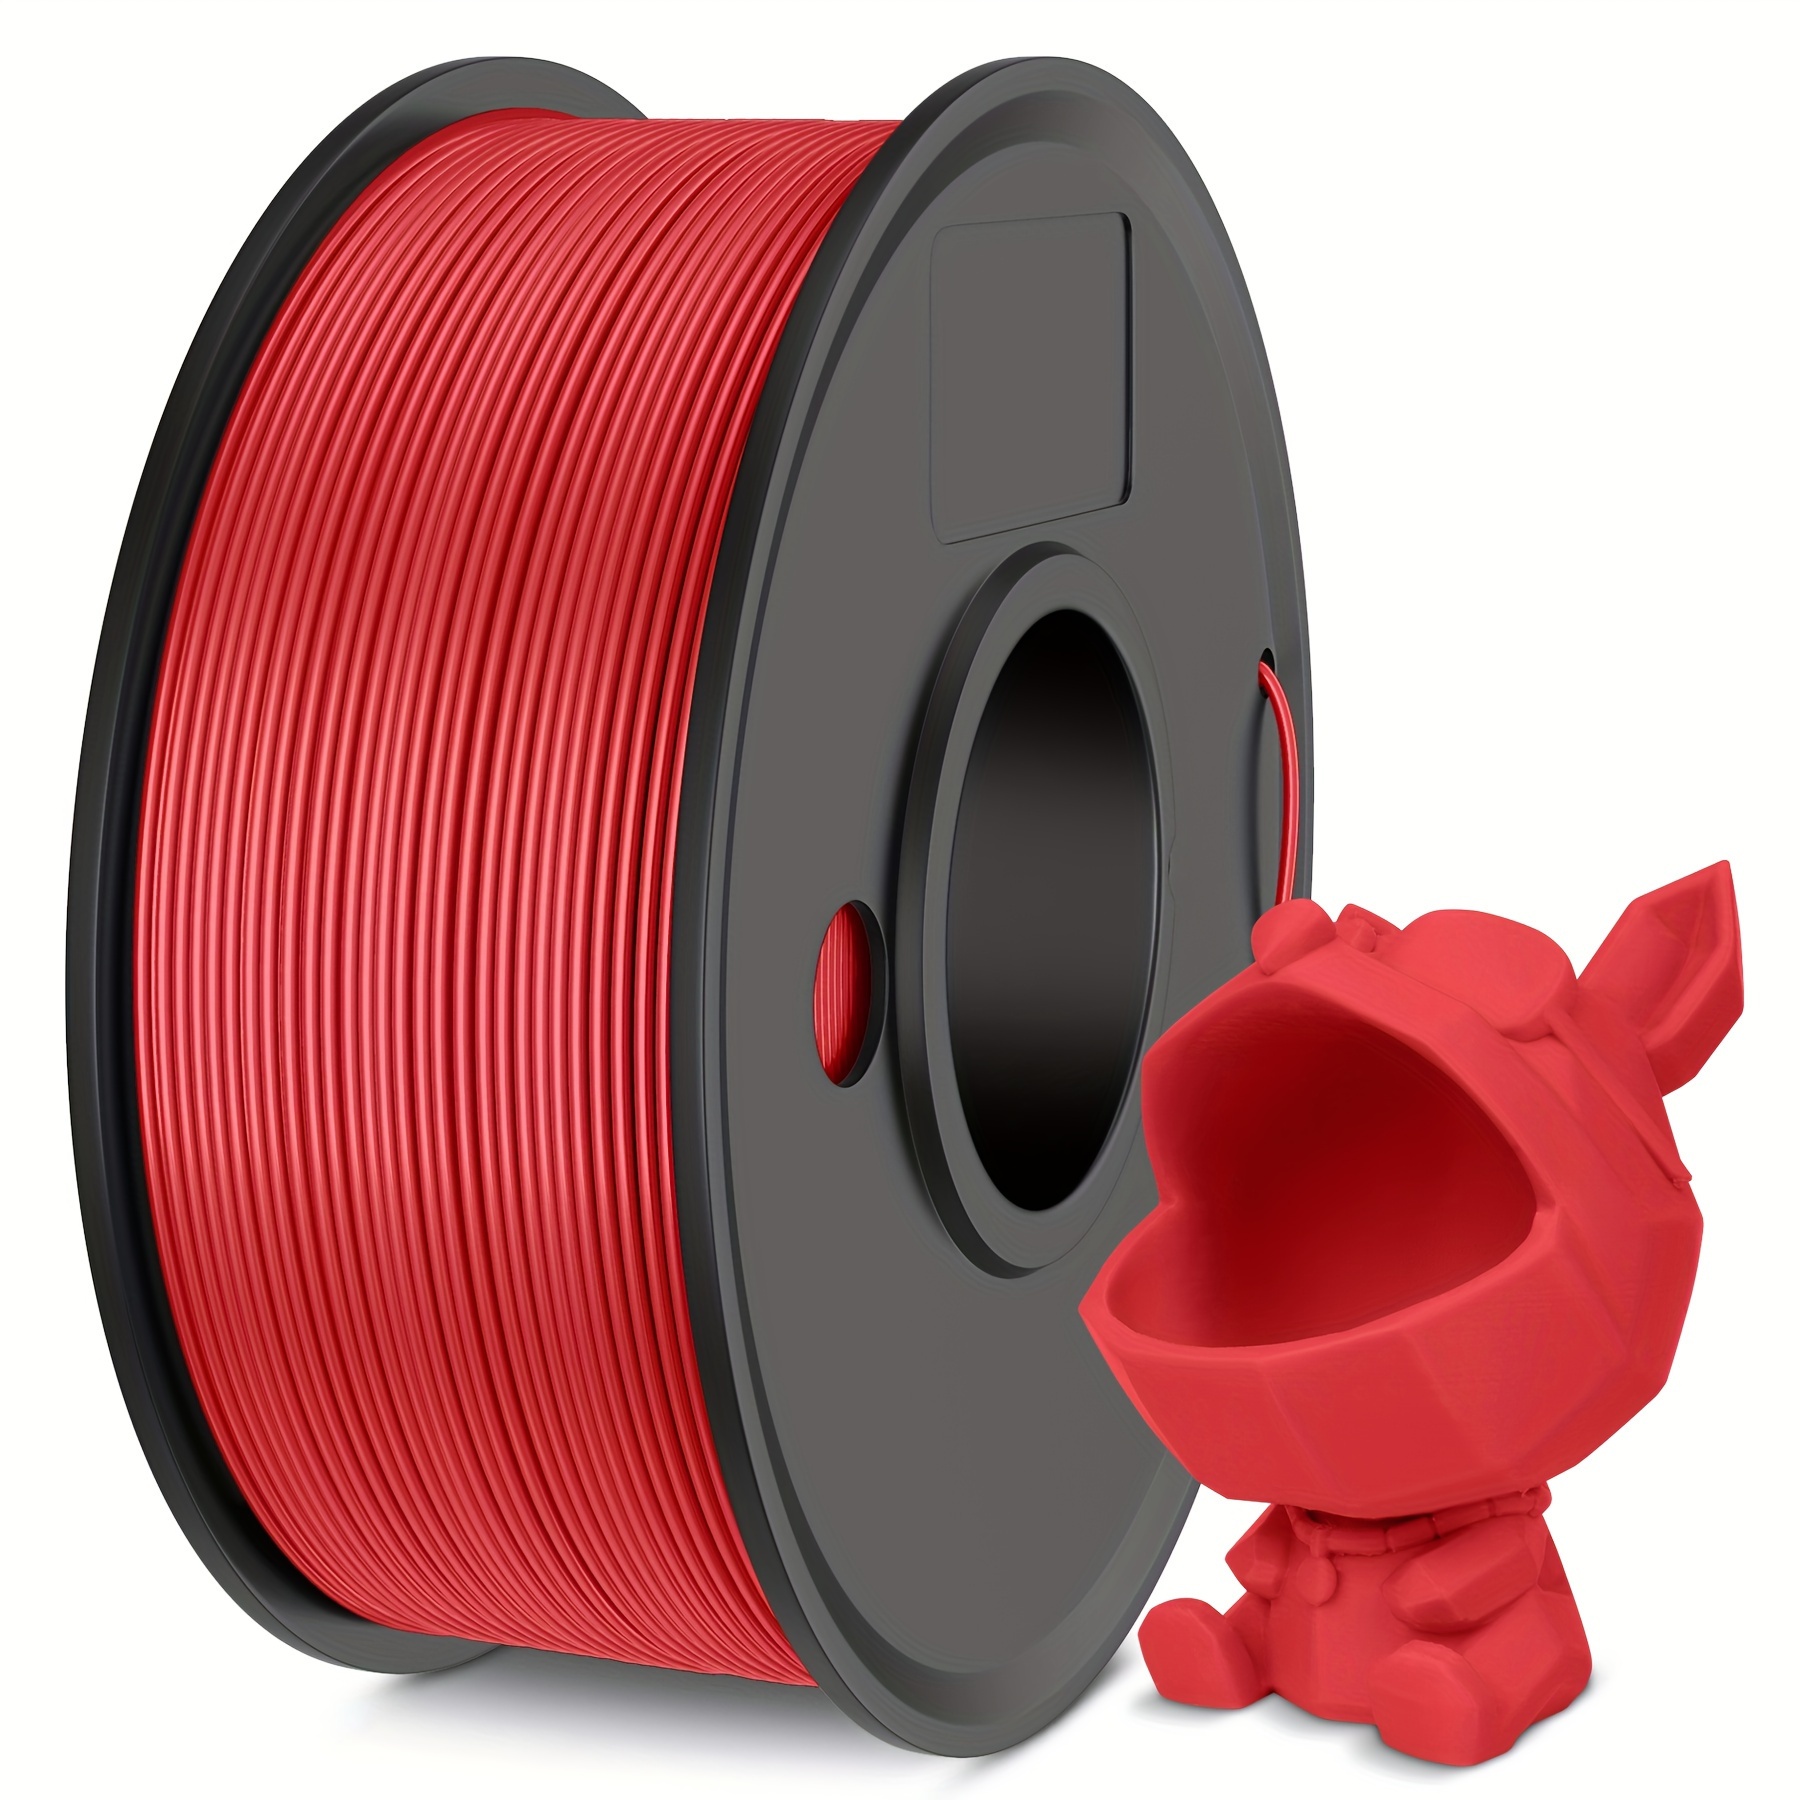 Creality 3d Fhyper Series Pla 1kg Red 3d Printer Filament Supplies Rapid  Prototyping Super Toughness - Office & School Supplies - Temu